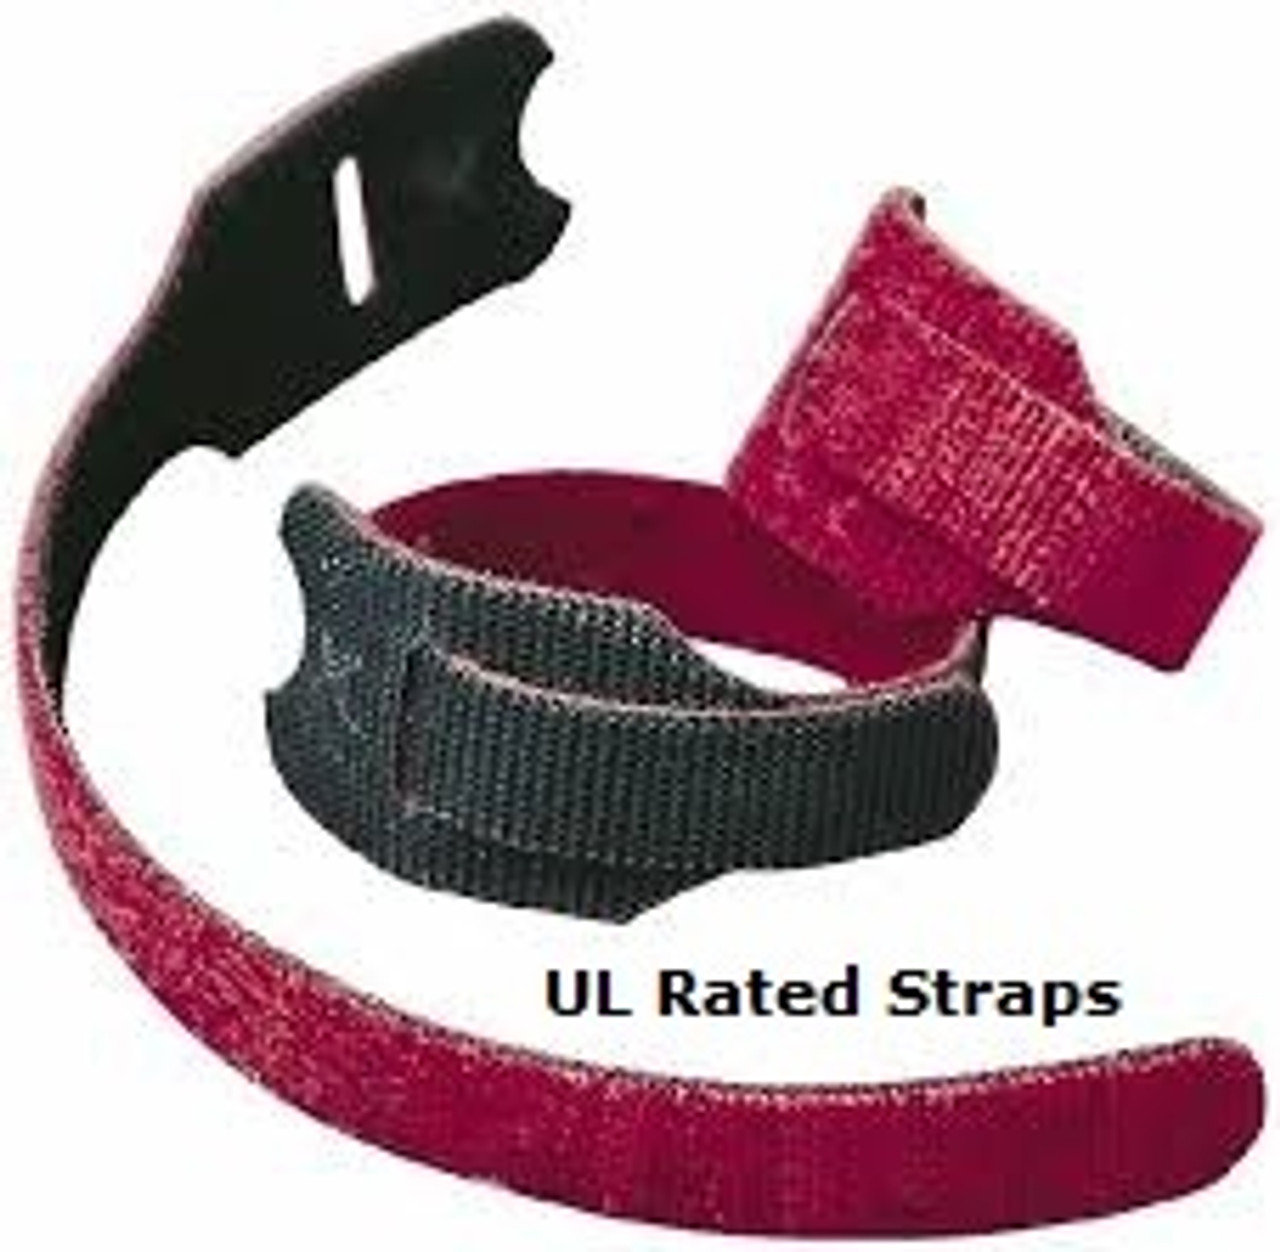 VELCRO® Brand ONE-WRAP® Straps UL Rated 3/4 x 12 25, 50 or 100 ct pucks